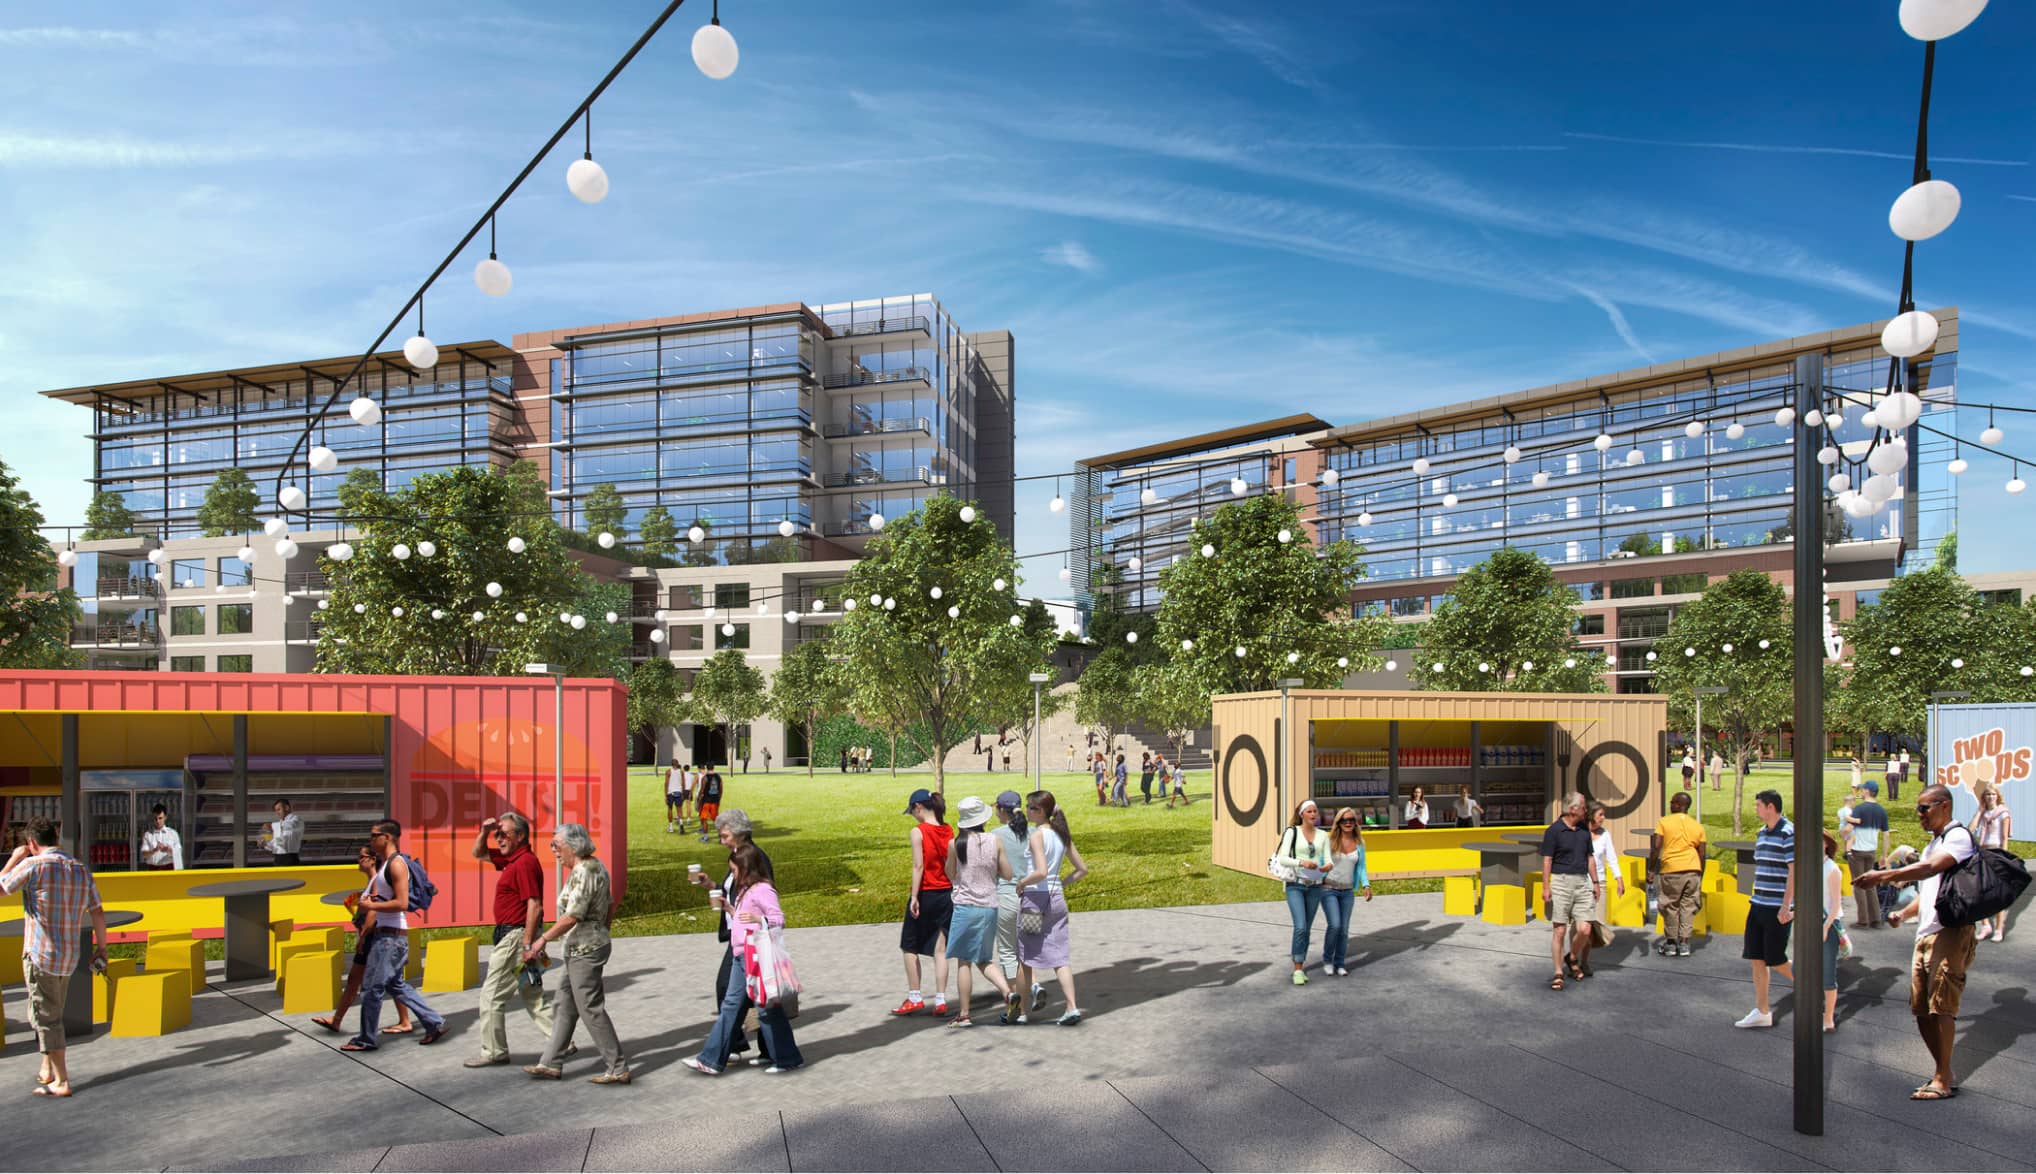 The design concept for Urban Creek Partners Quarry Yards in Atlanta encourages people living in the neighborhood's residential properties and working in its office buildings — as well as people from across the metro area — to enjoy a plethora of amenities from open food court areas to large green spaces.